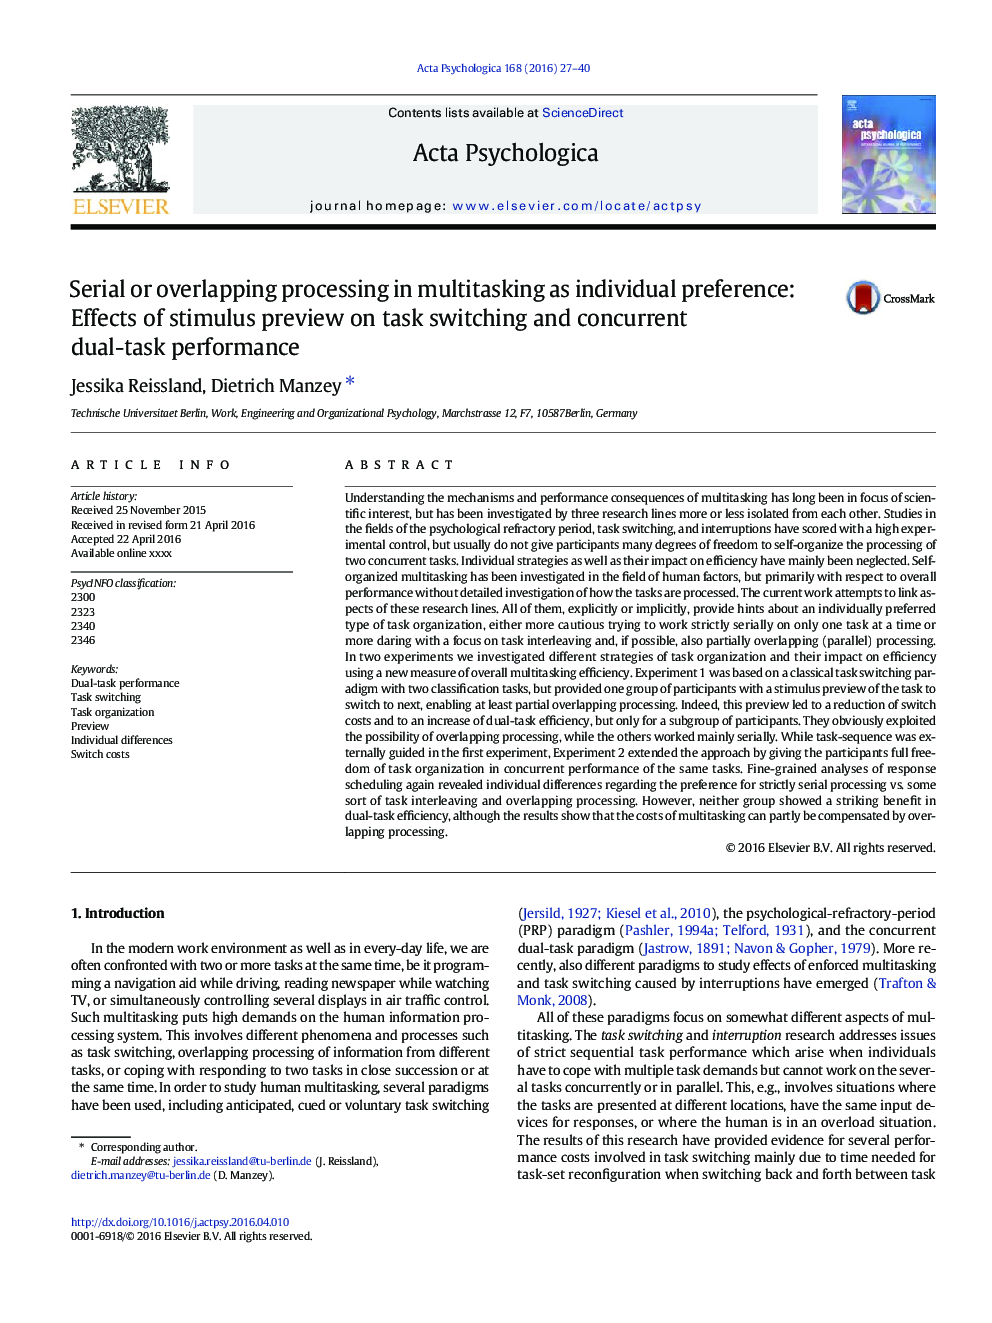 Serial or overlapping processing in multitasking as individual preference: Effects of stimulus preview on task switching and concurrent dual-task performance